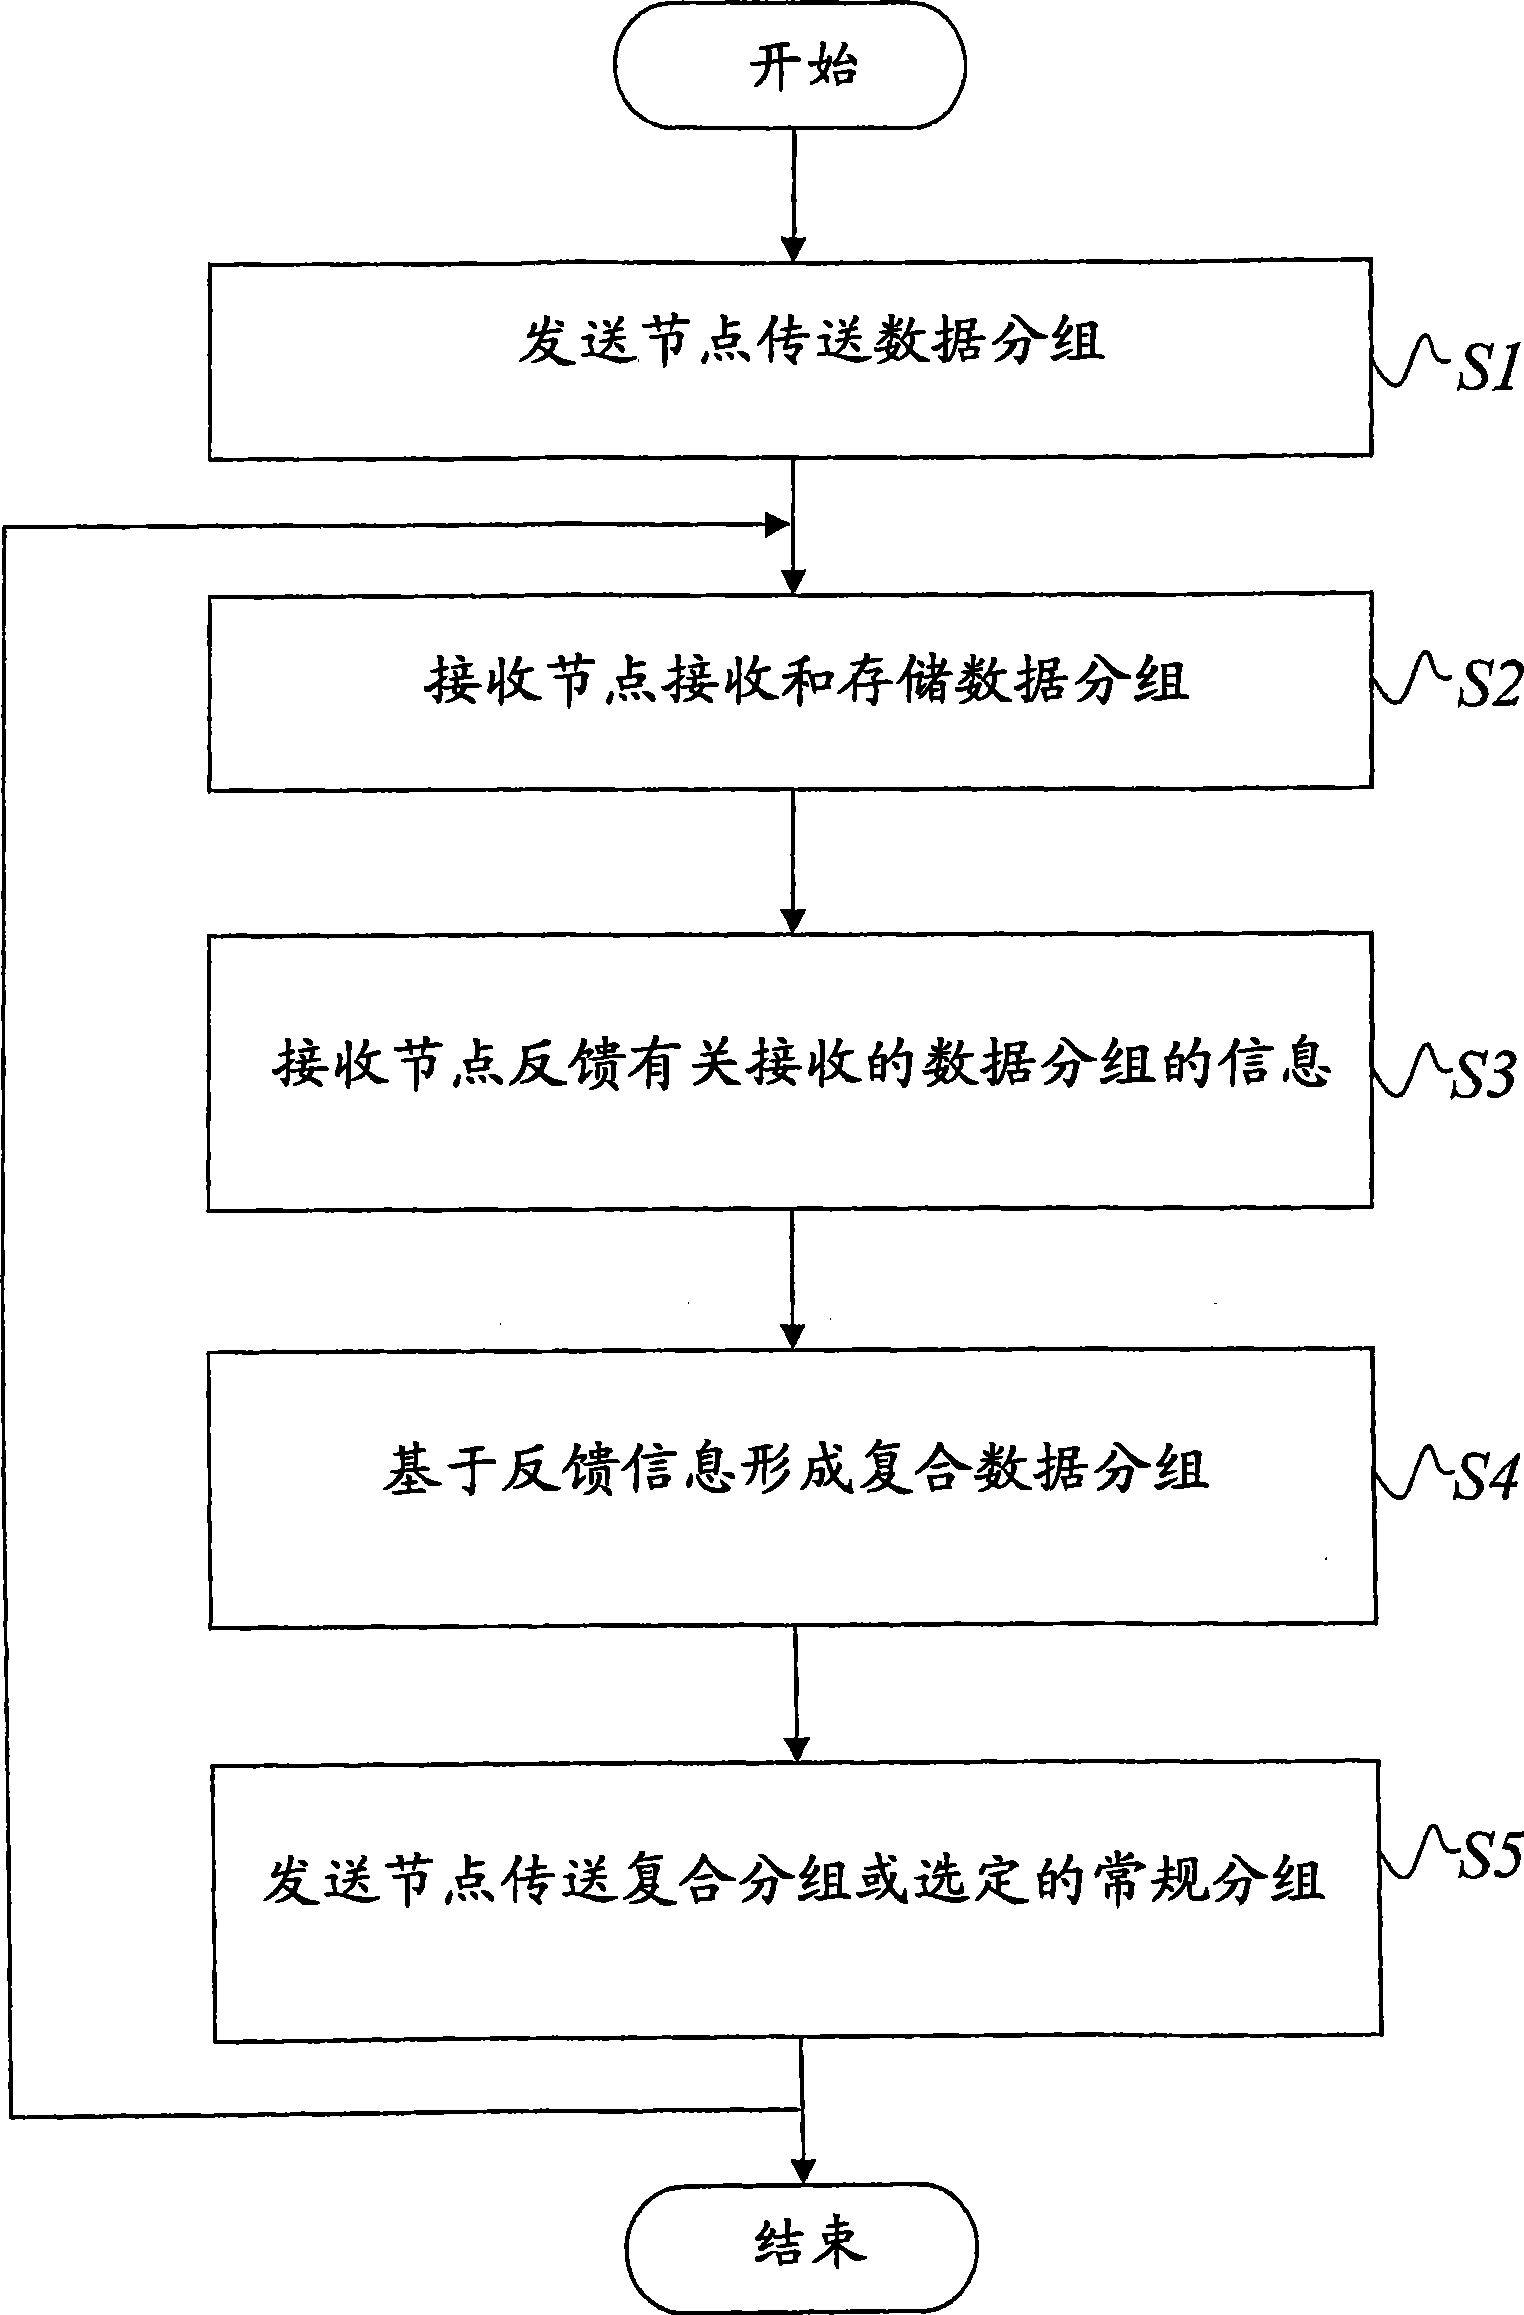 Reliable multicast with linearly independent data packet coding